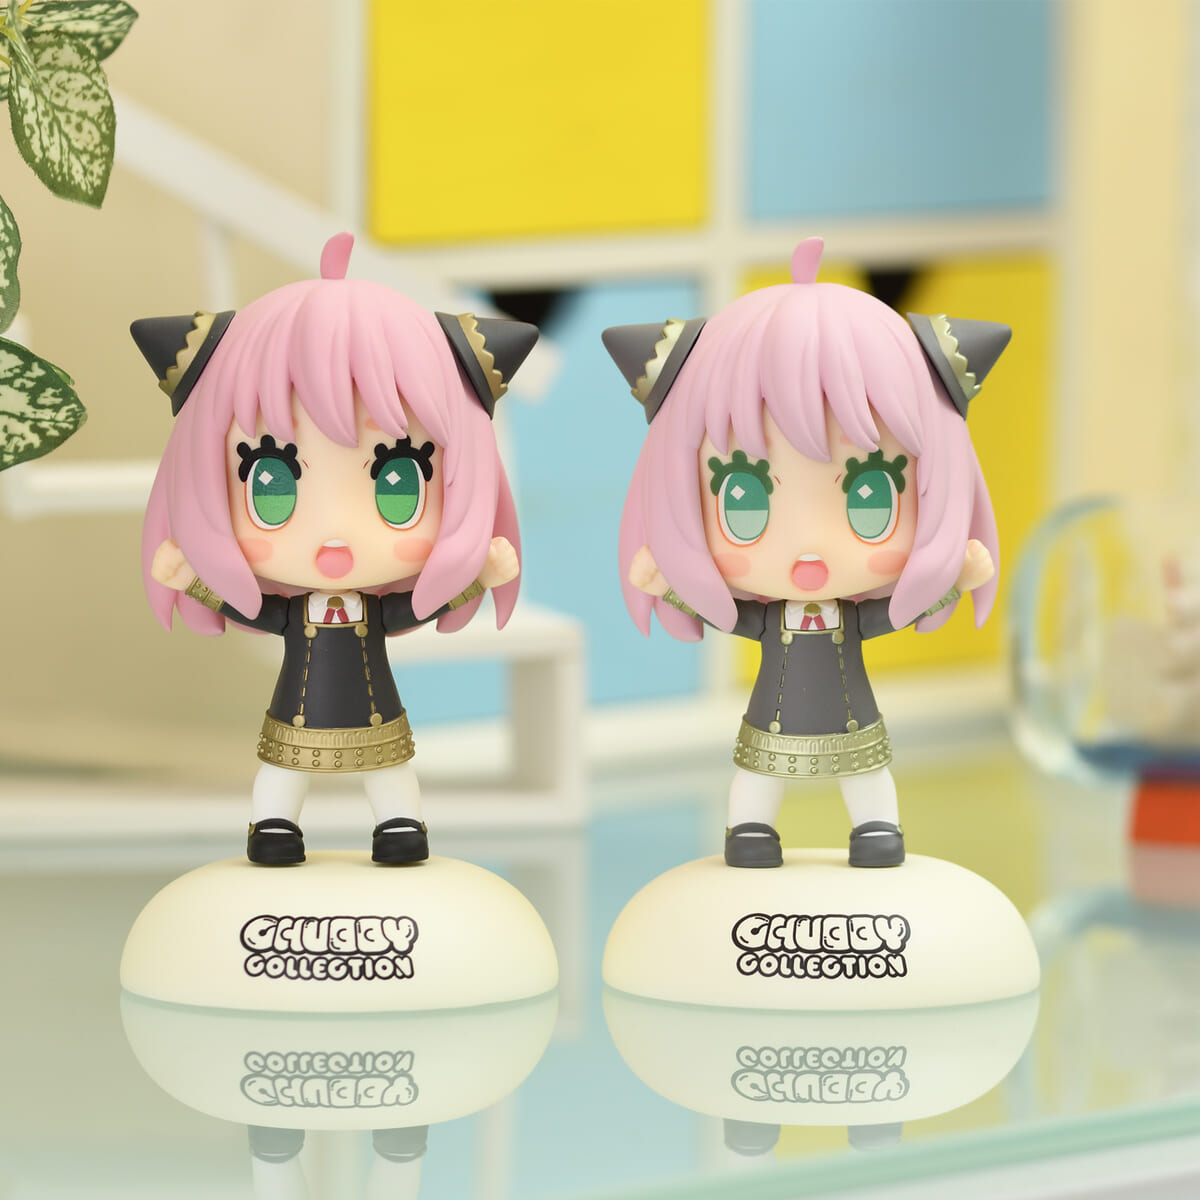 CHUBBY COLLECTION フィギュア（アーニャ・フォージャー）1